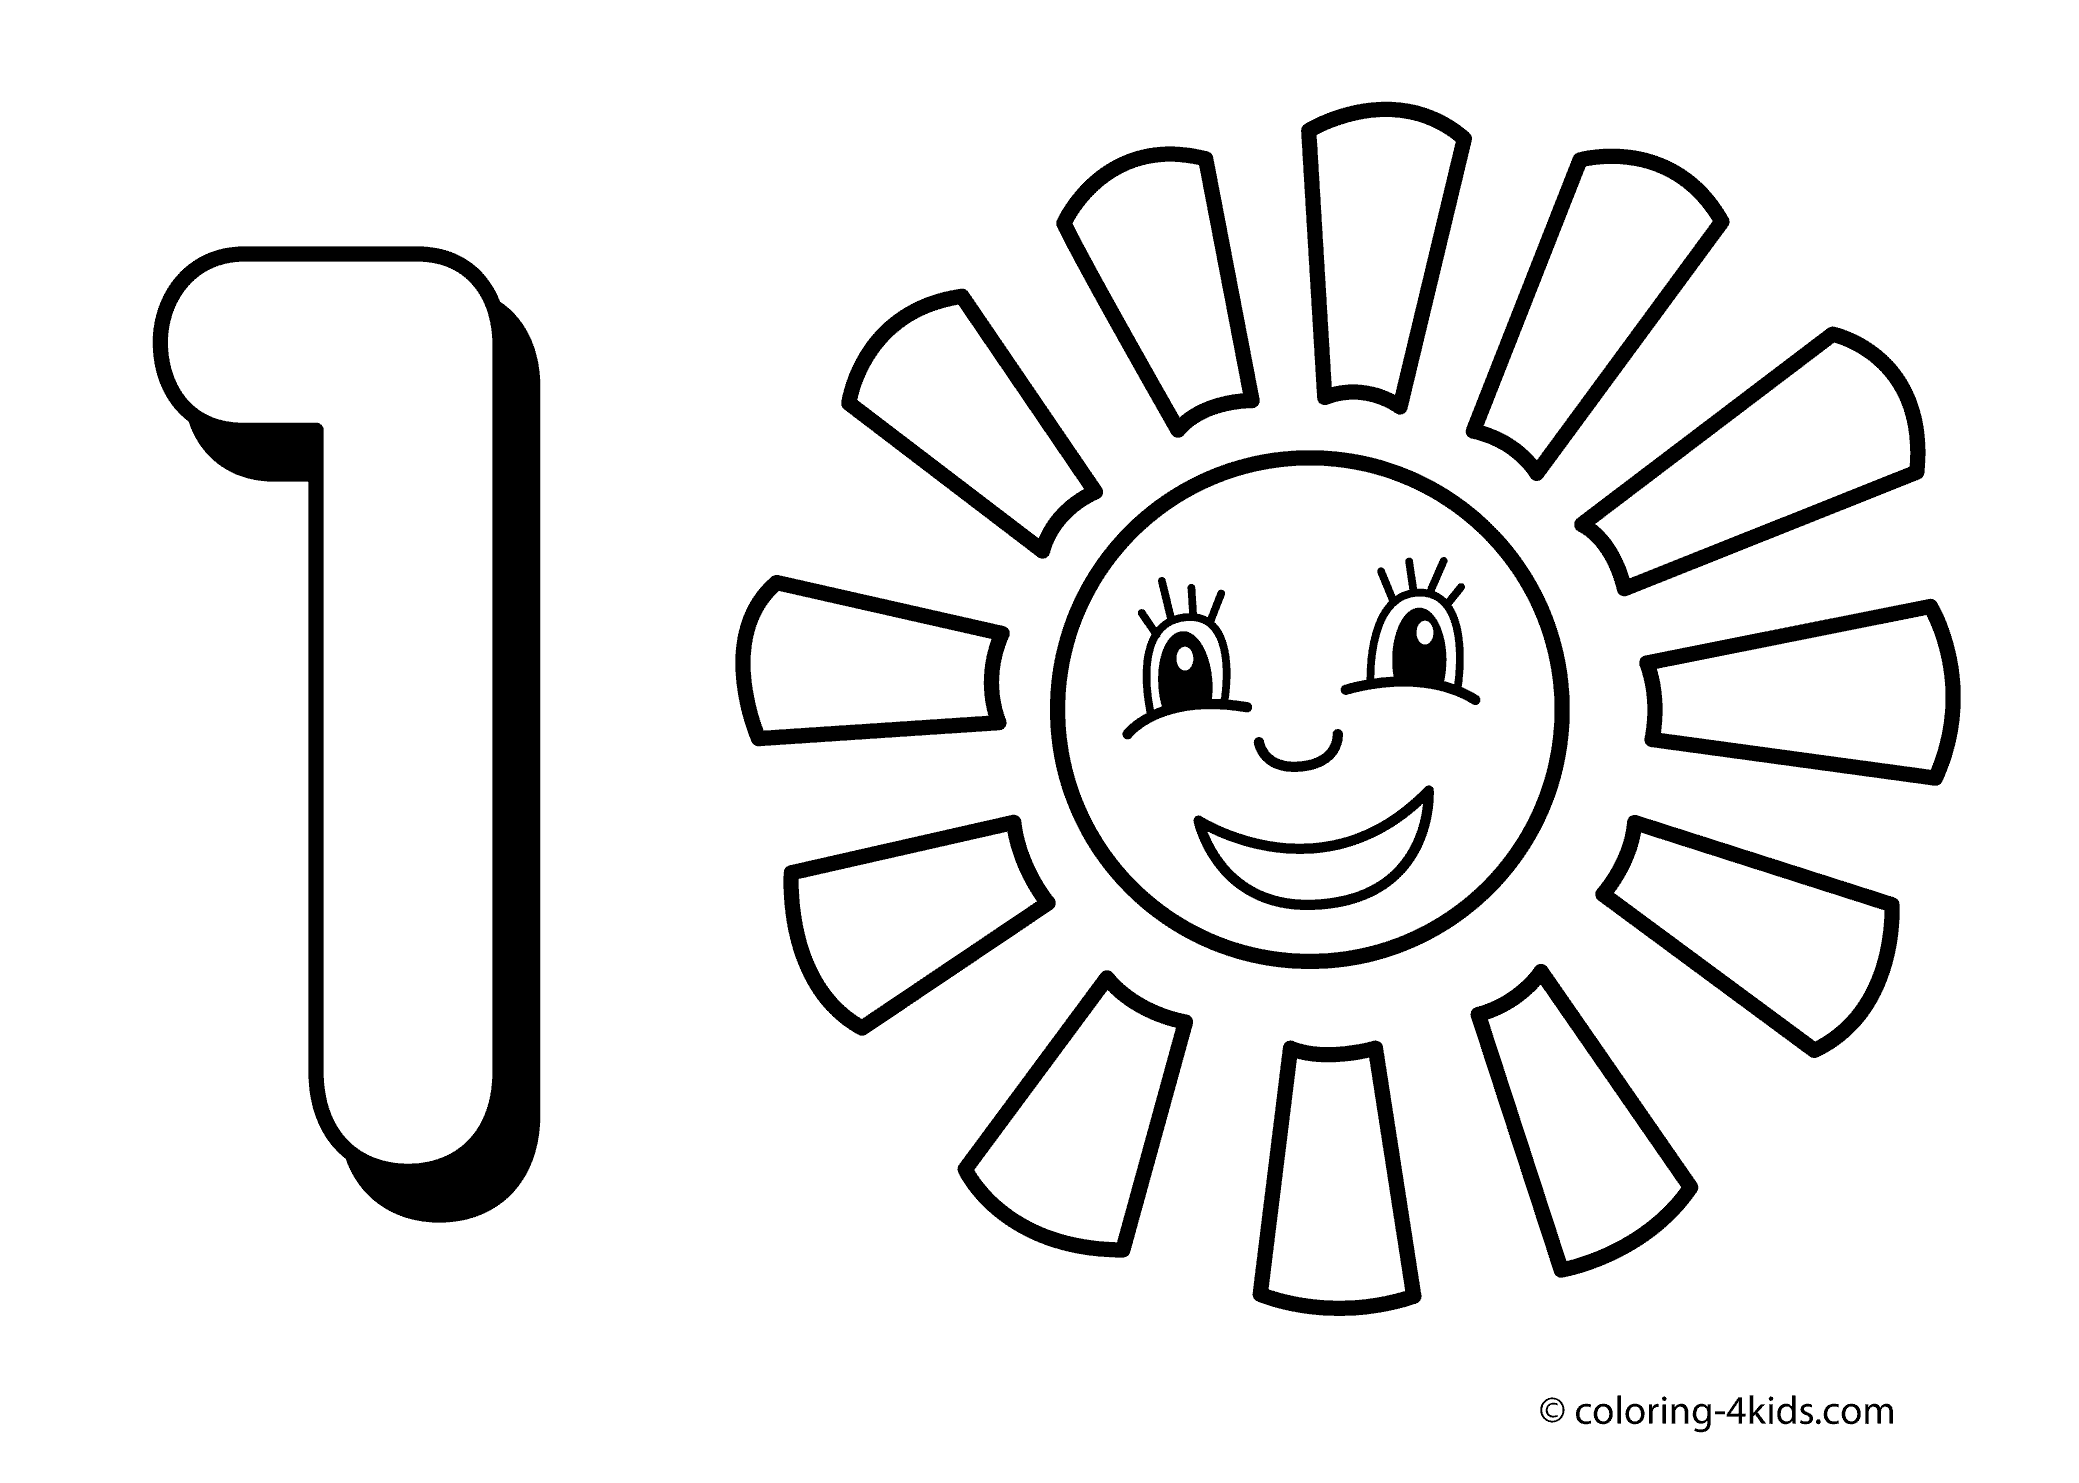 Number One 5 Cool Coloring Page